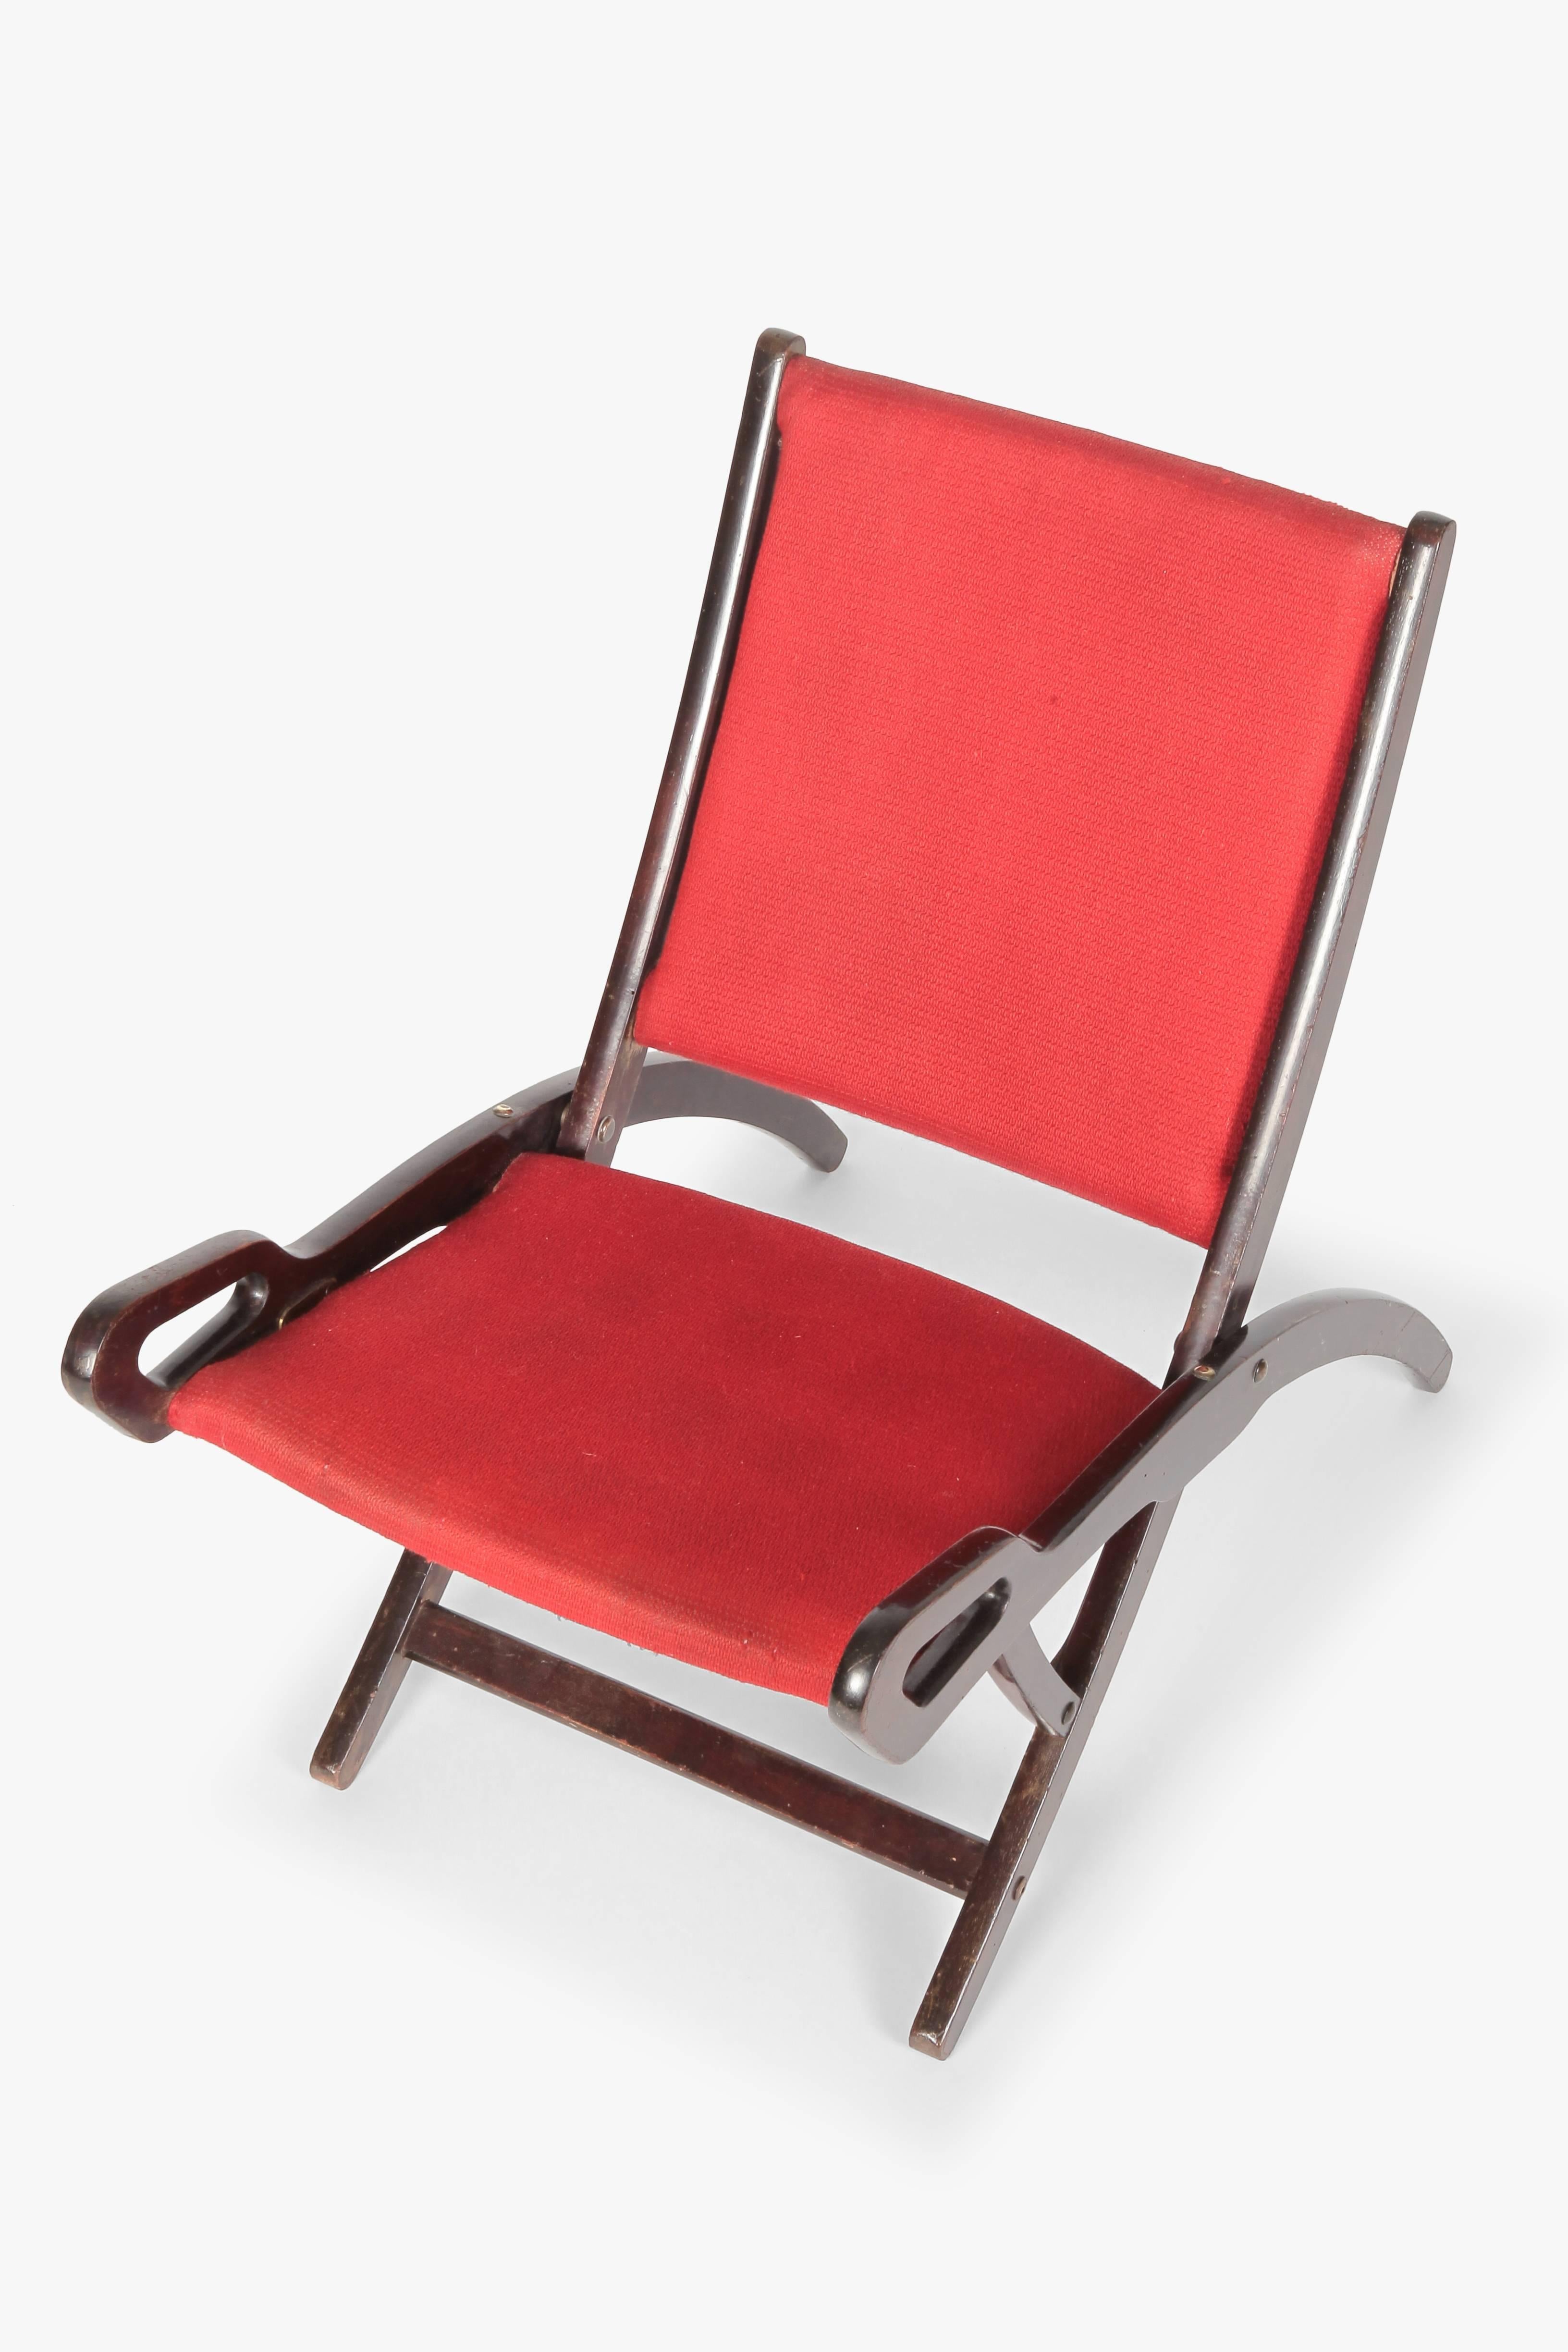 Gio Ponti “Nifea” folding chair manufactured by Fratelli Reguitti in the 1950s. Dark, lacquered walnut frame with striking patina and brass hardware. Seat and rest are covered with the original red cotton fabric. Beautiful vintage condition.